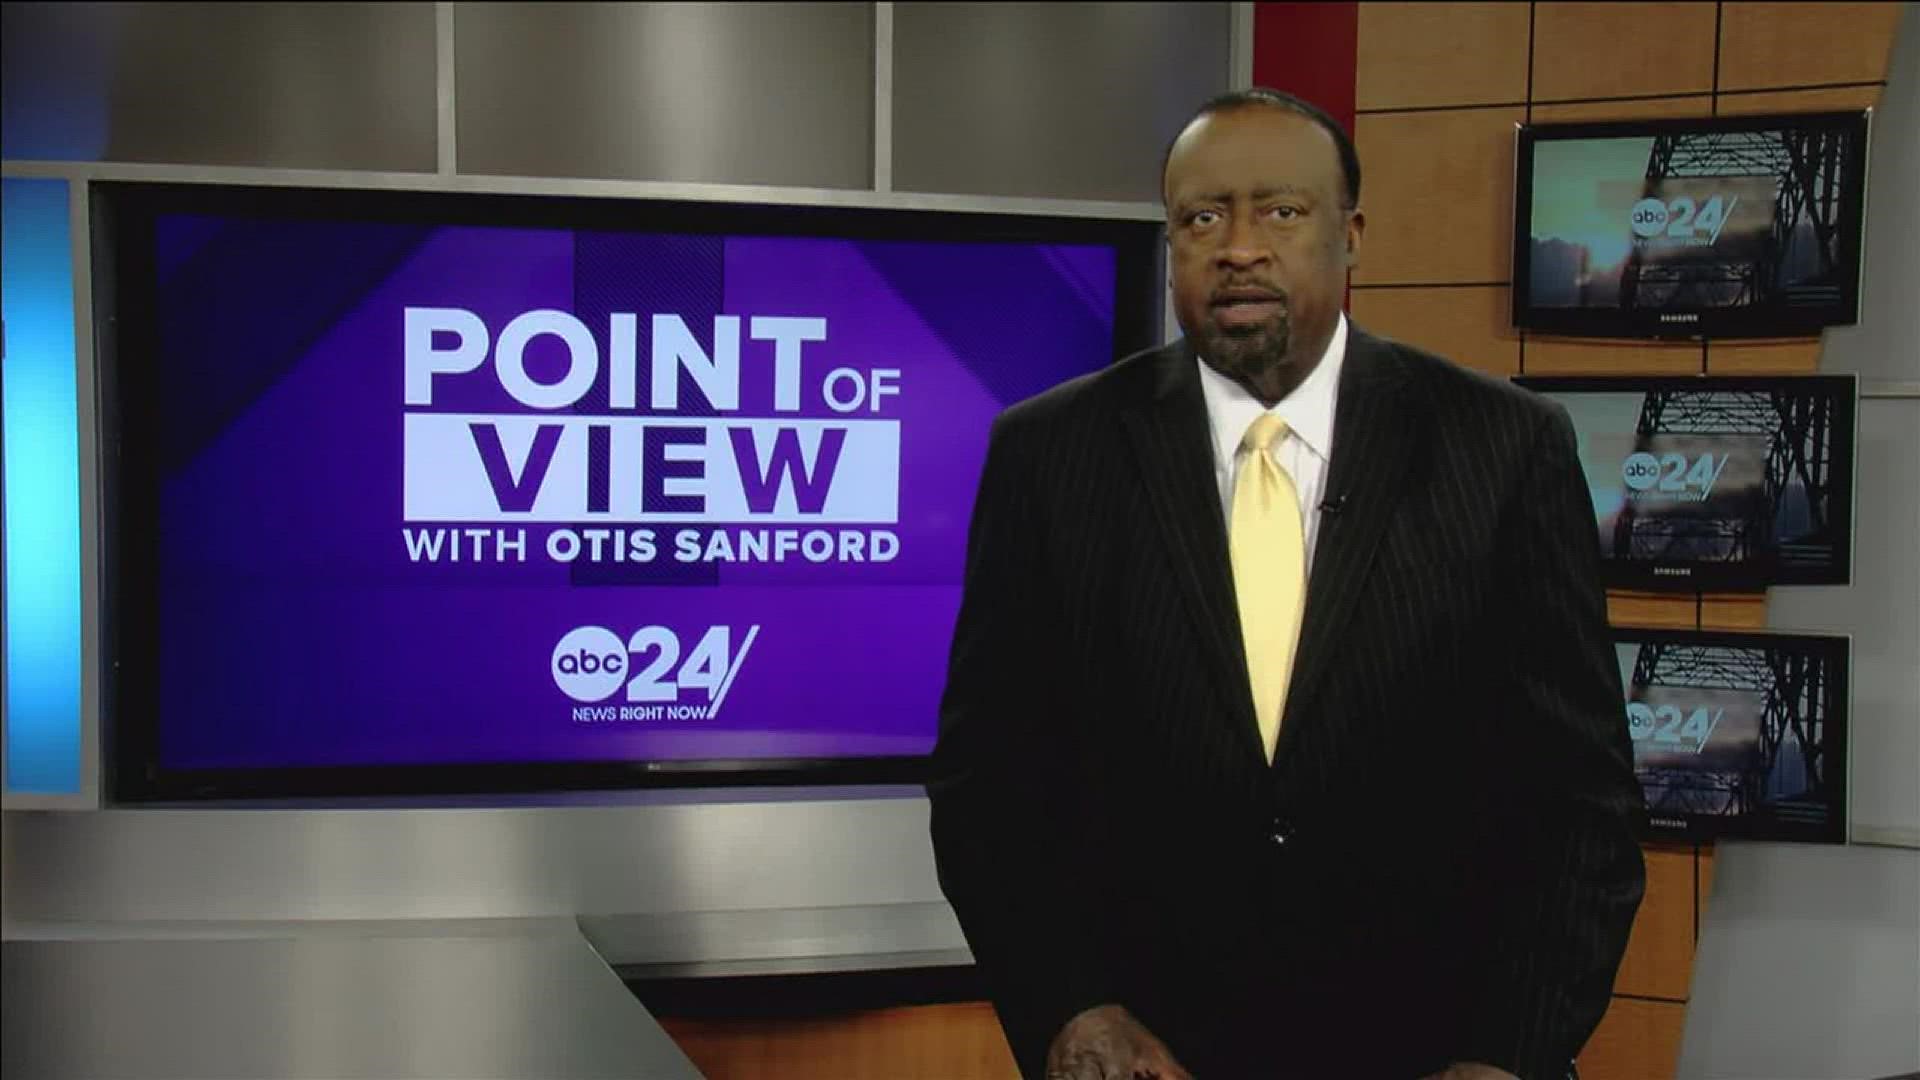 ABC 24 political analyst and commentator Otis Sanford shared his point of view on redistricting in Tennessee.